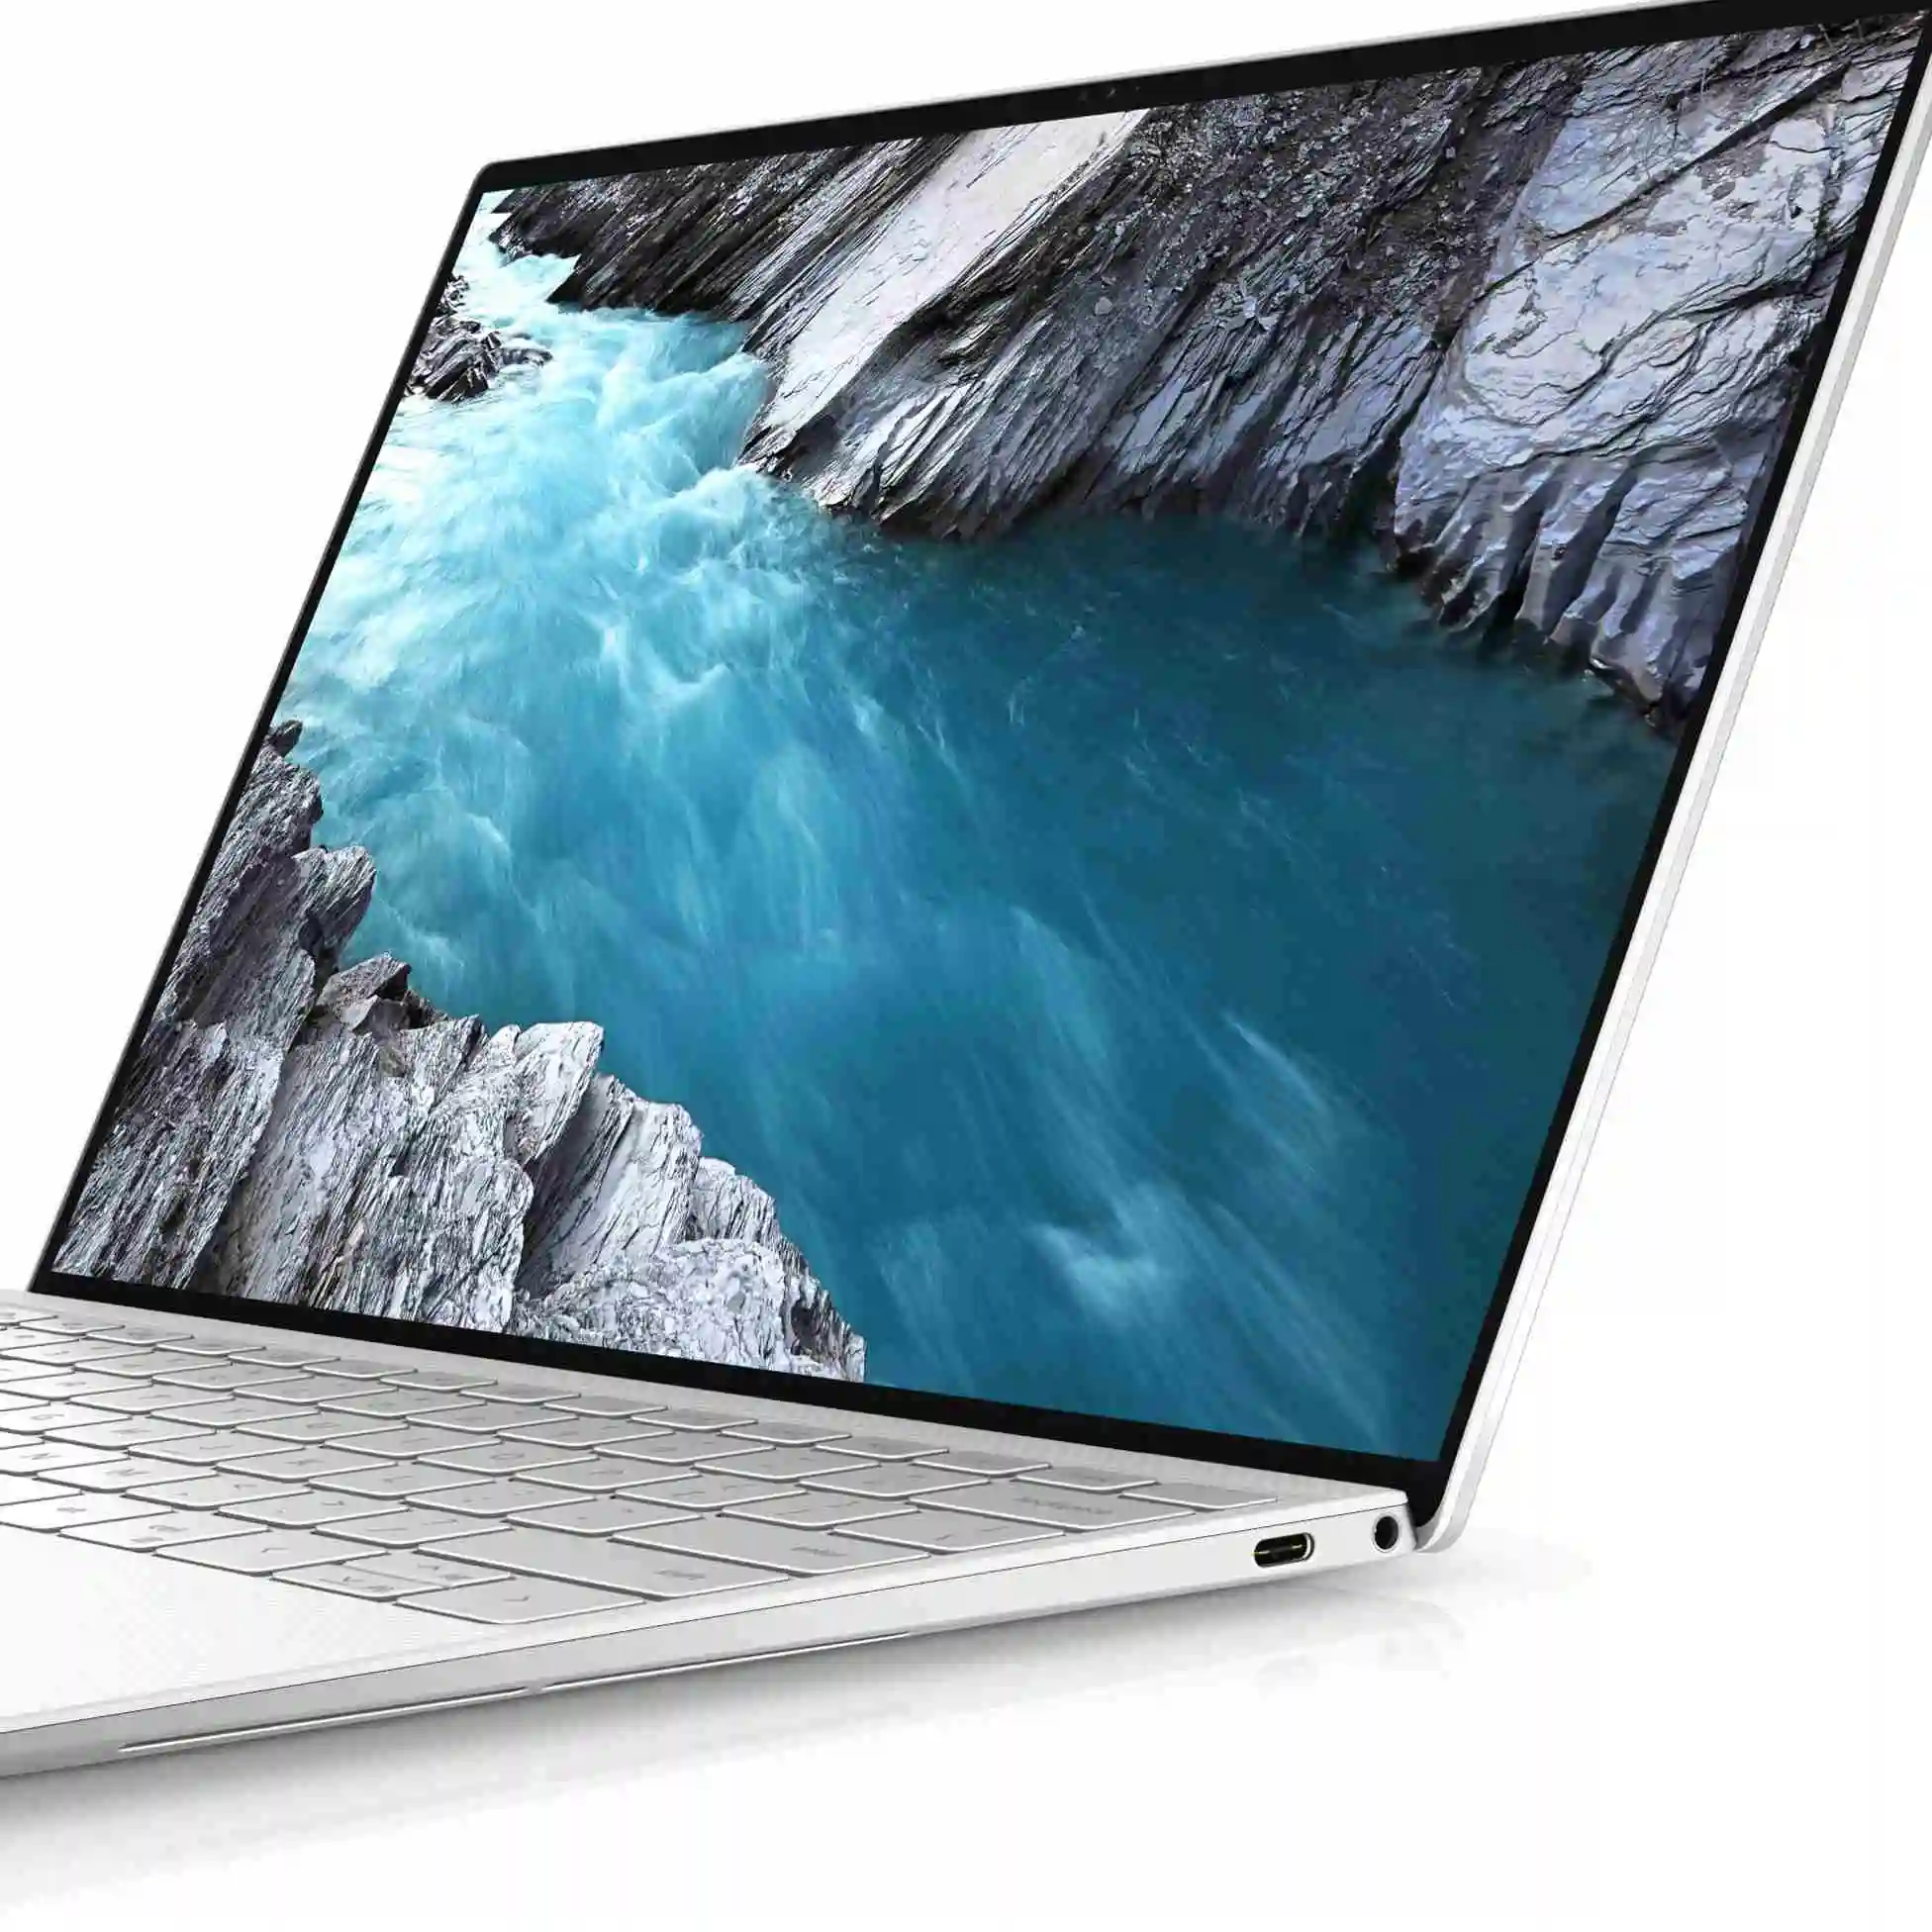 NEW FOR-Dells Xps Laptop i9-11900H 2.5GHz 64GB 2TB SSD RTX 3060 17inch UHD Touch NEW